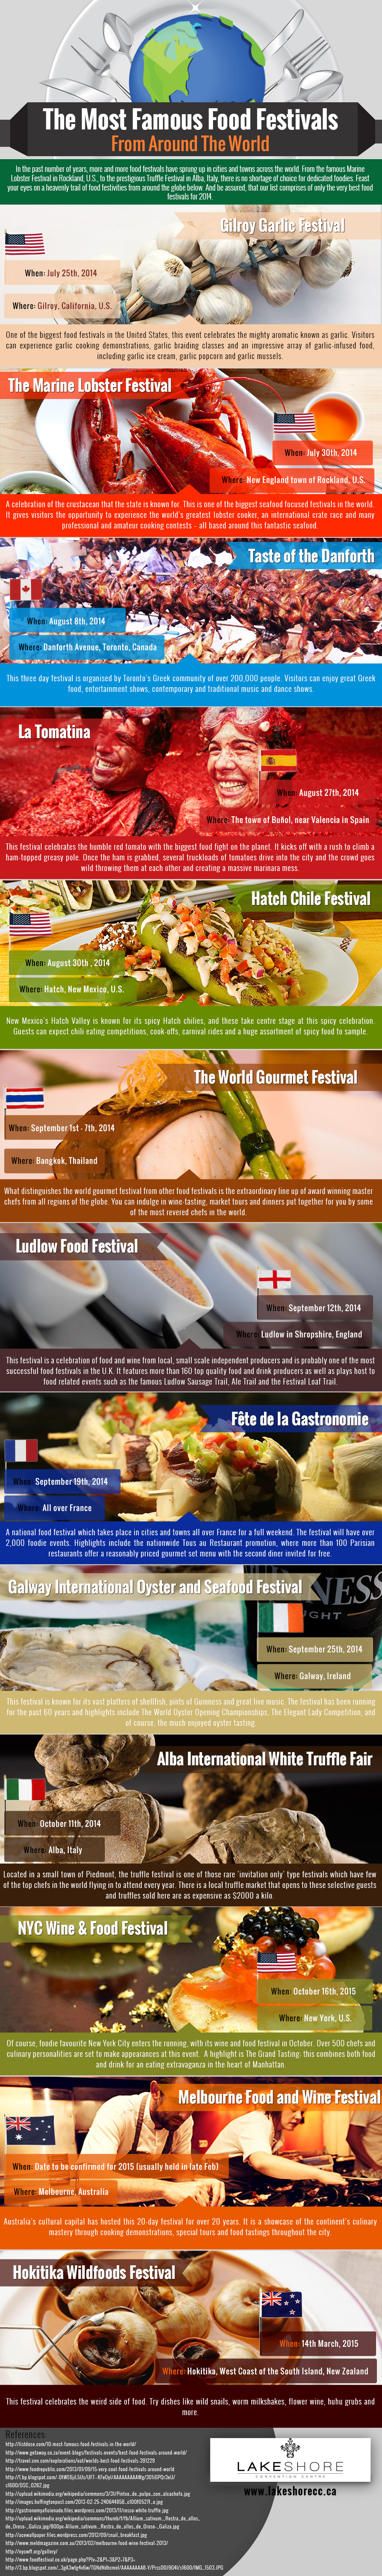 The Most Famous Food Festivals From Around the World